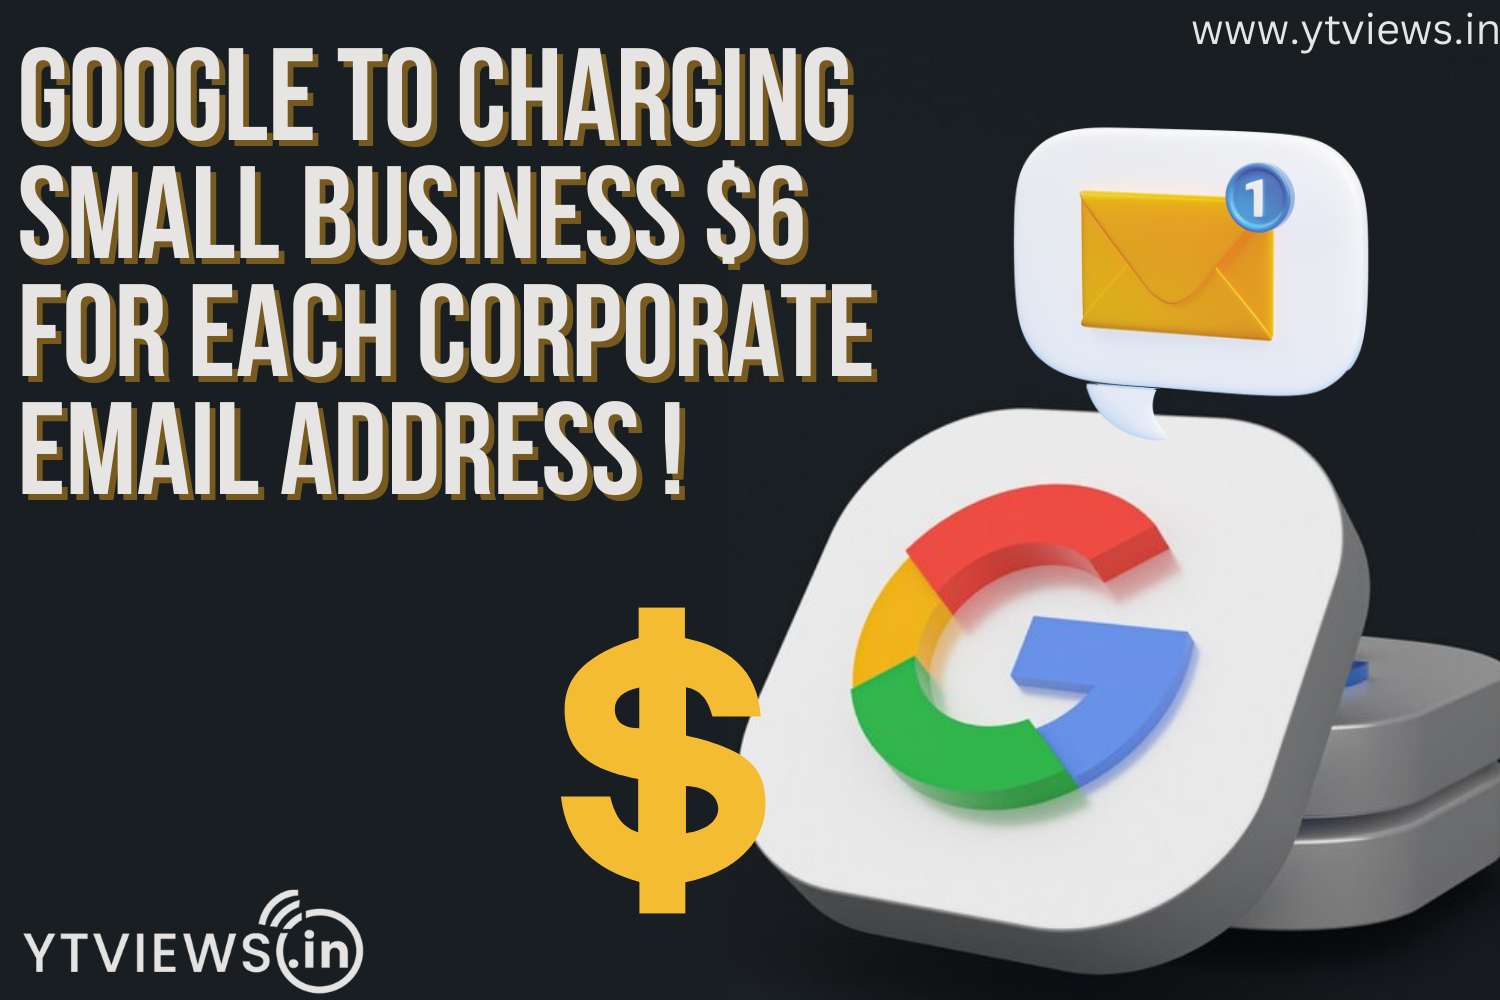 Google To Charging Small Businesses $6 For Each Corporate Email Address